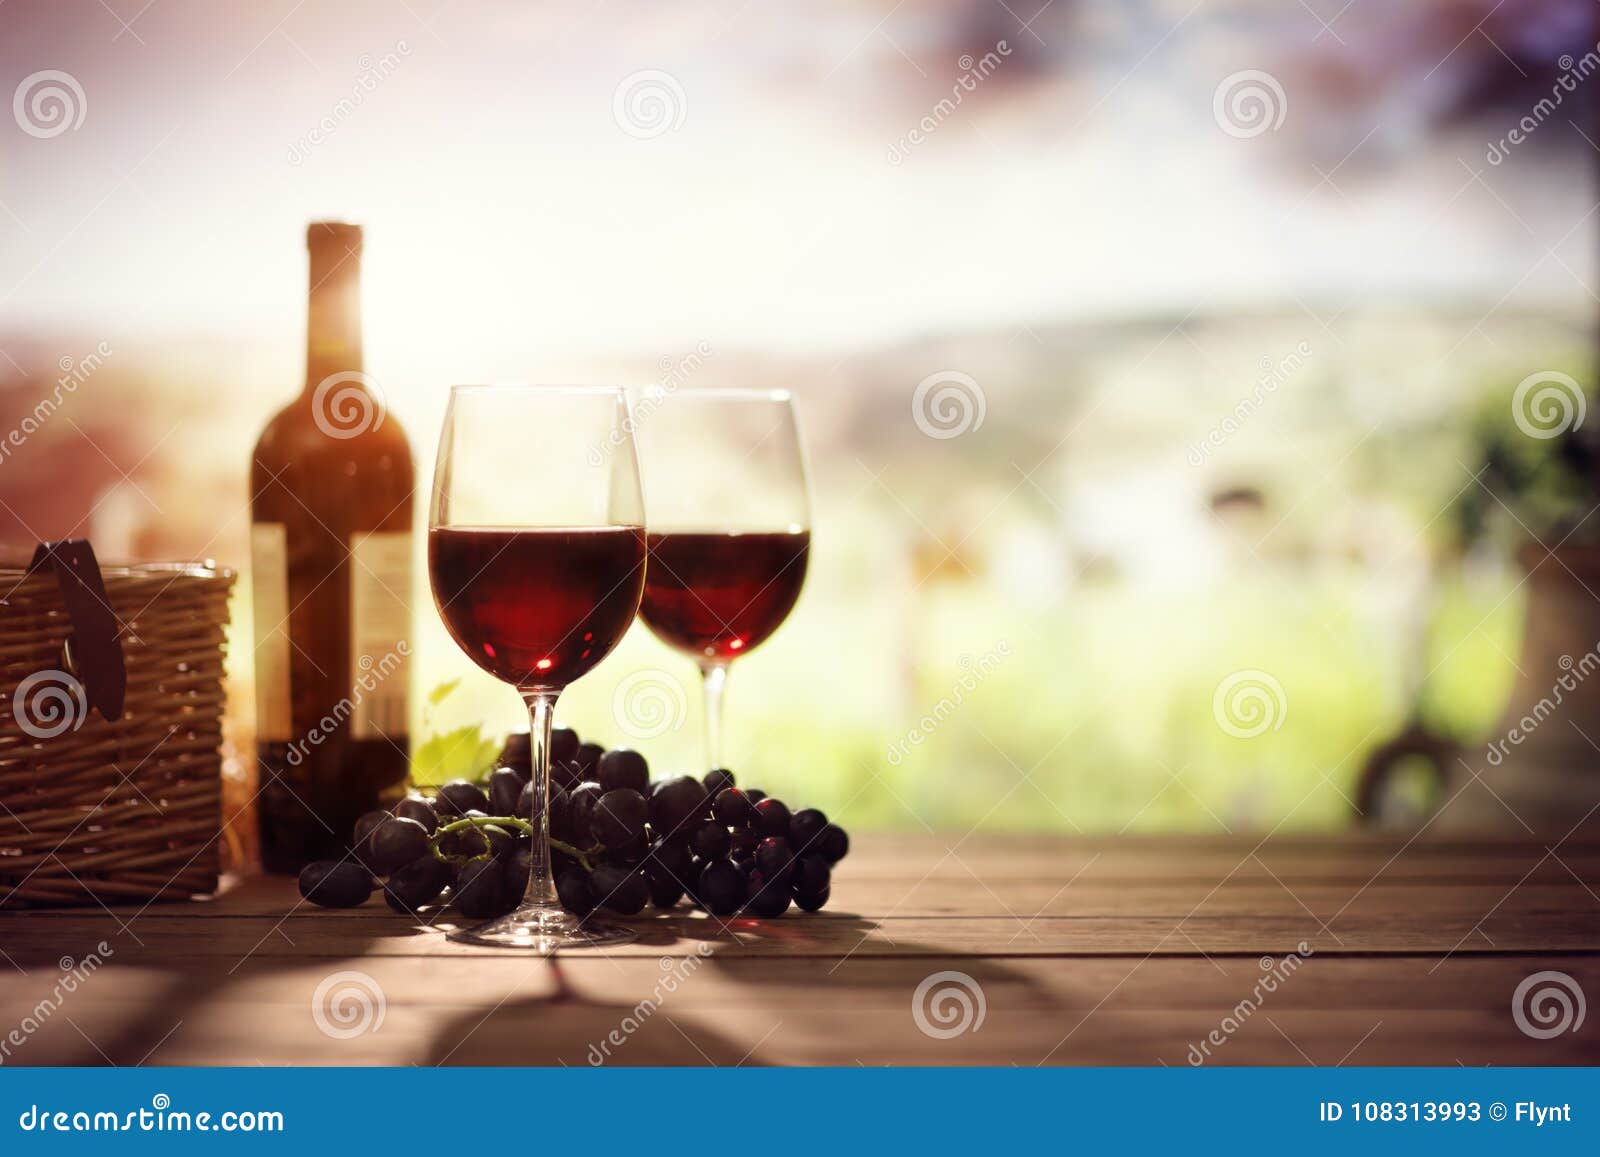 red wine bottle and glass on table in vineyard tuscany italy